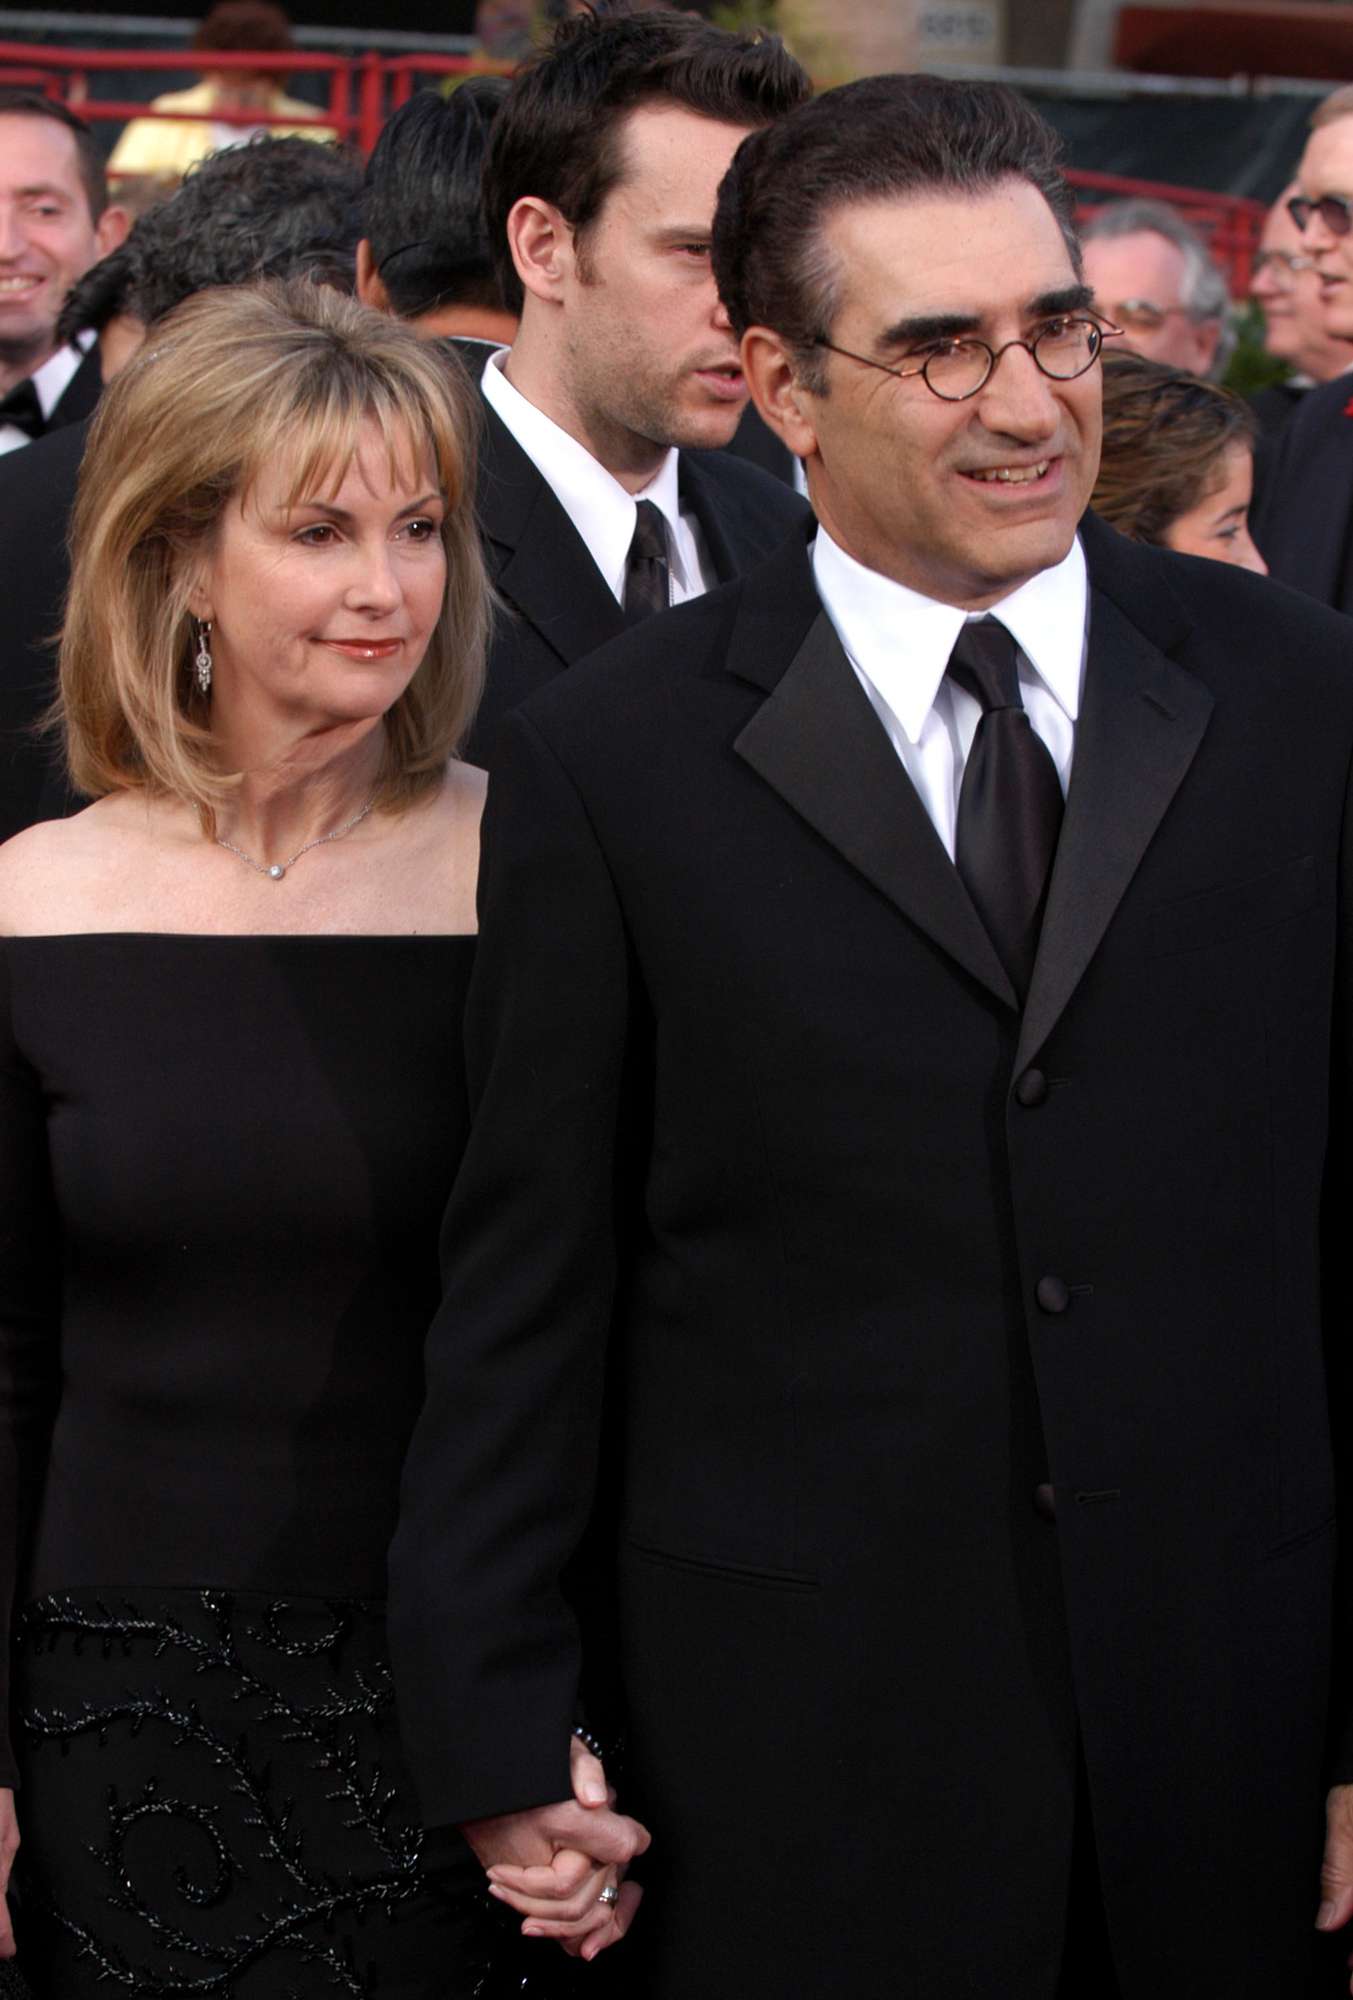 Eugene Levy (right) and wife Deborah Divine during The 76th Annual Academy Awards - Arrivals by Jeff Kravitz at Kodak Theatre in Hollywood, California, United States